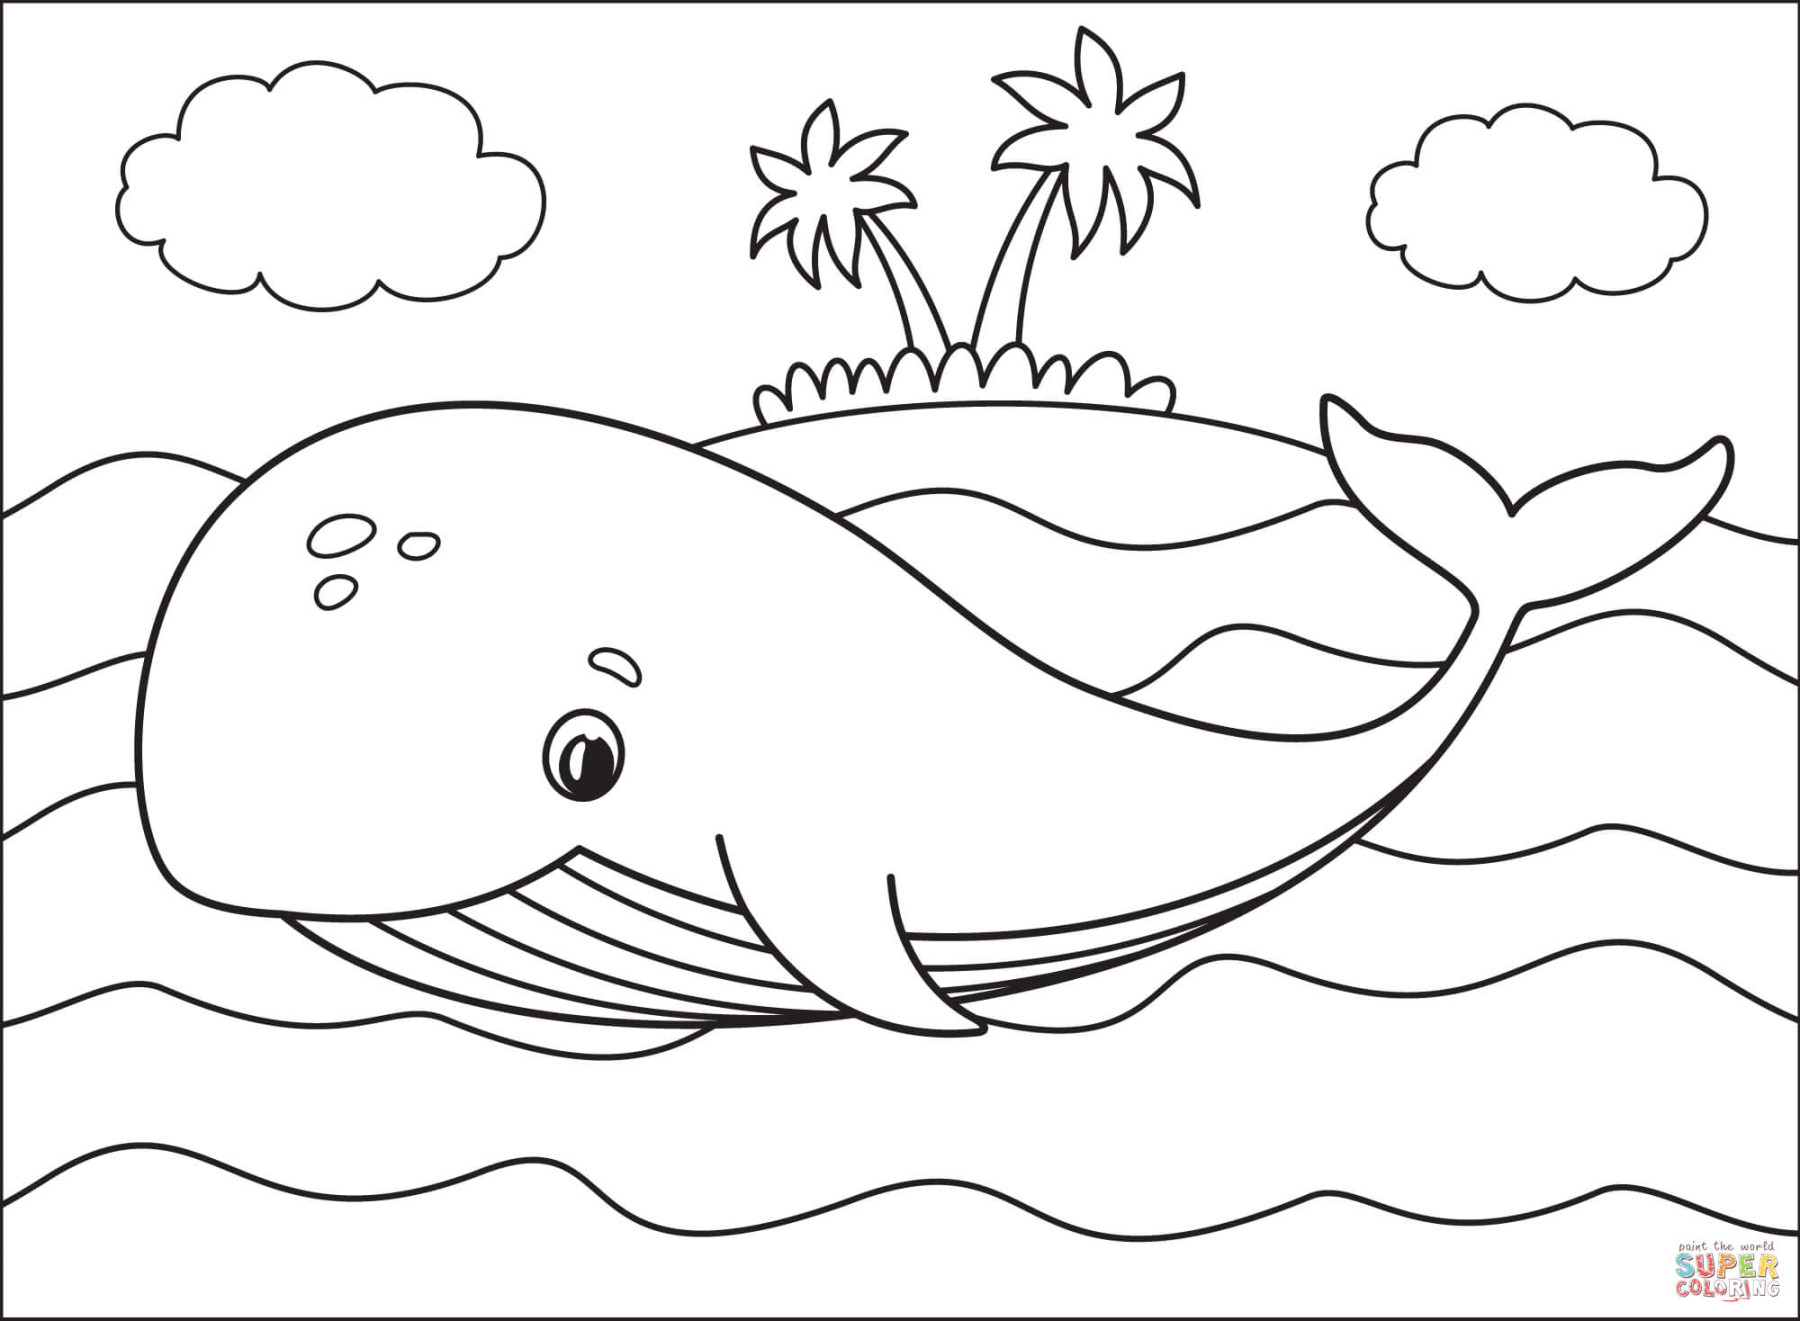 Whale coloring page  Free Printable Coloring Pages